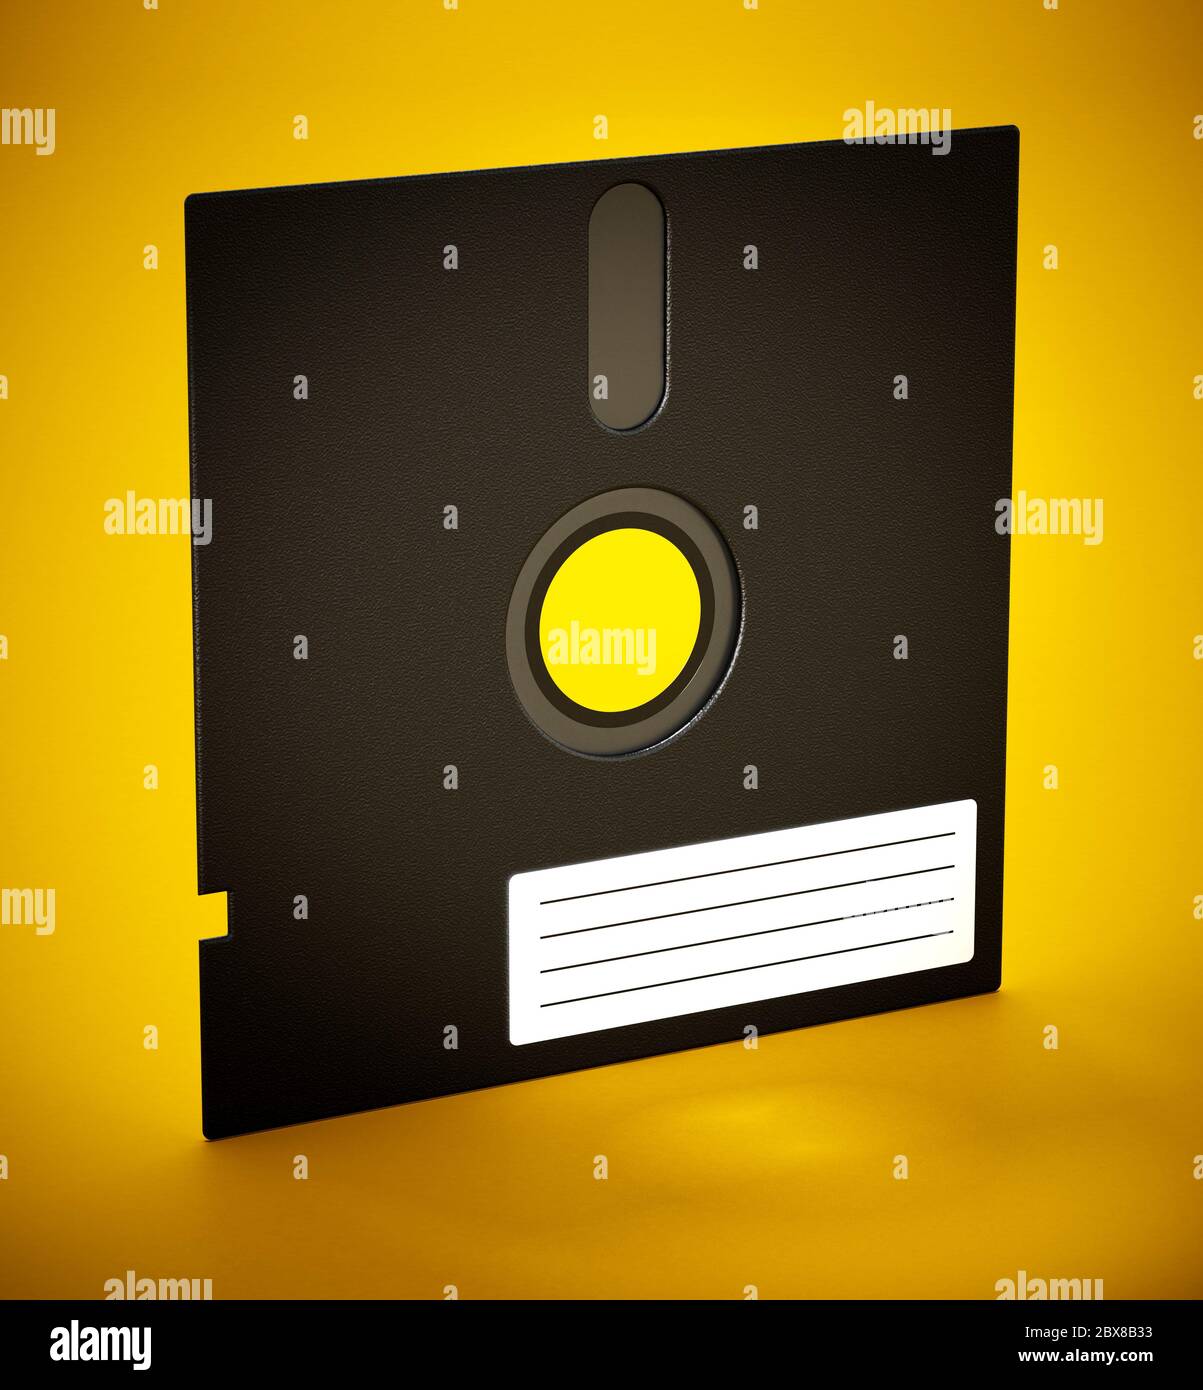 5.25 inch floppy disk isolated on yellow background. 3D illustration. Stock Photo